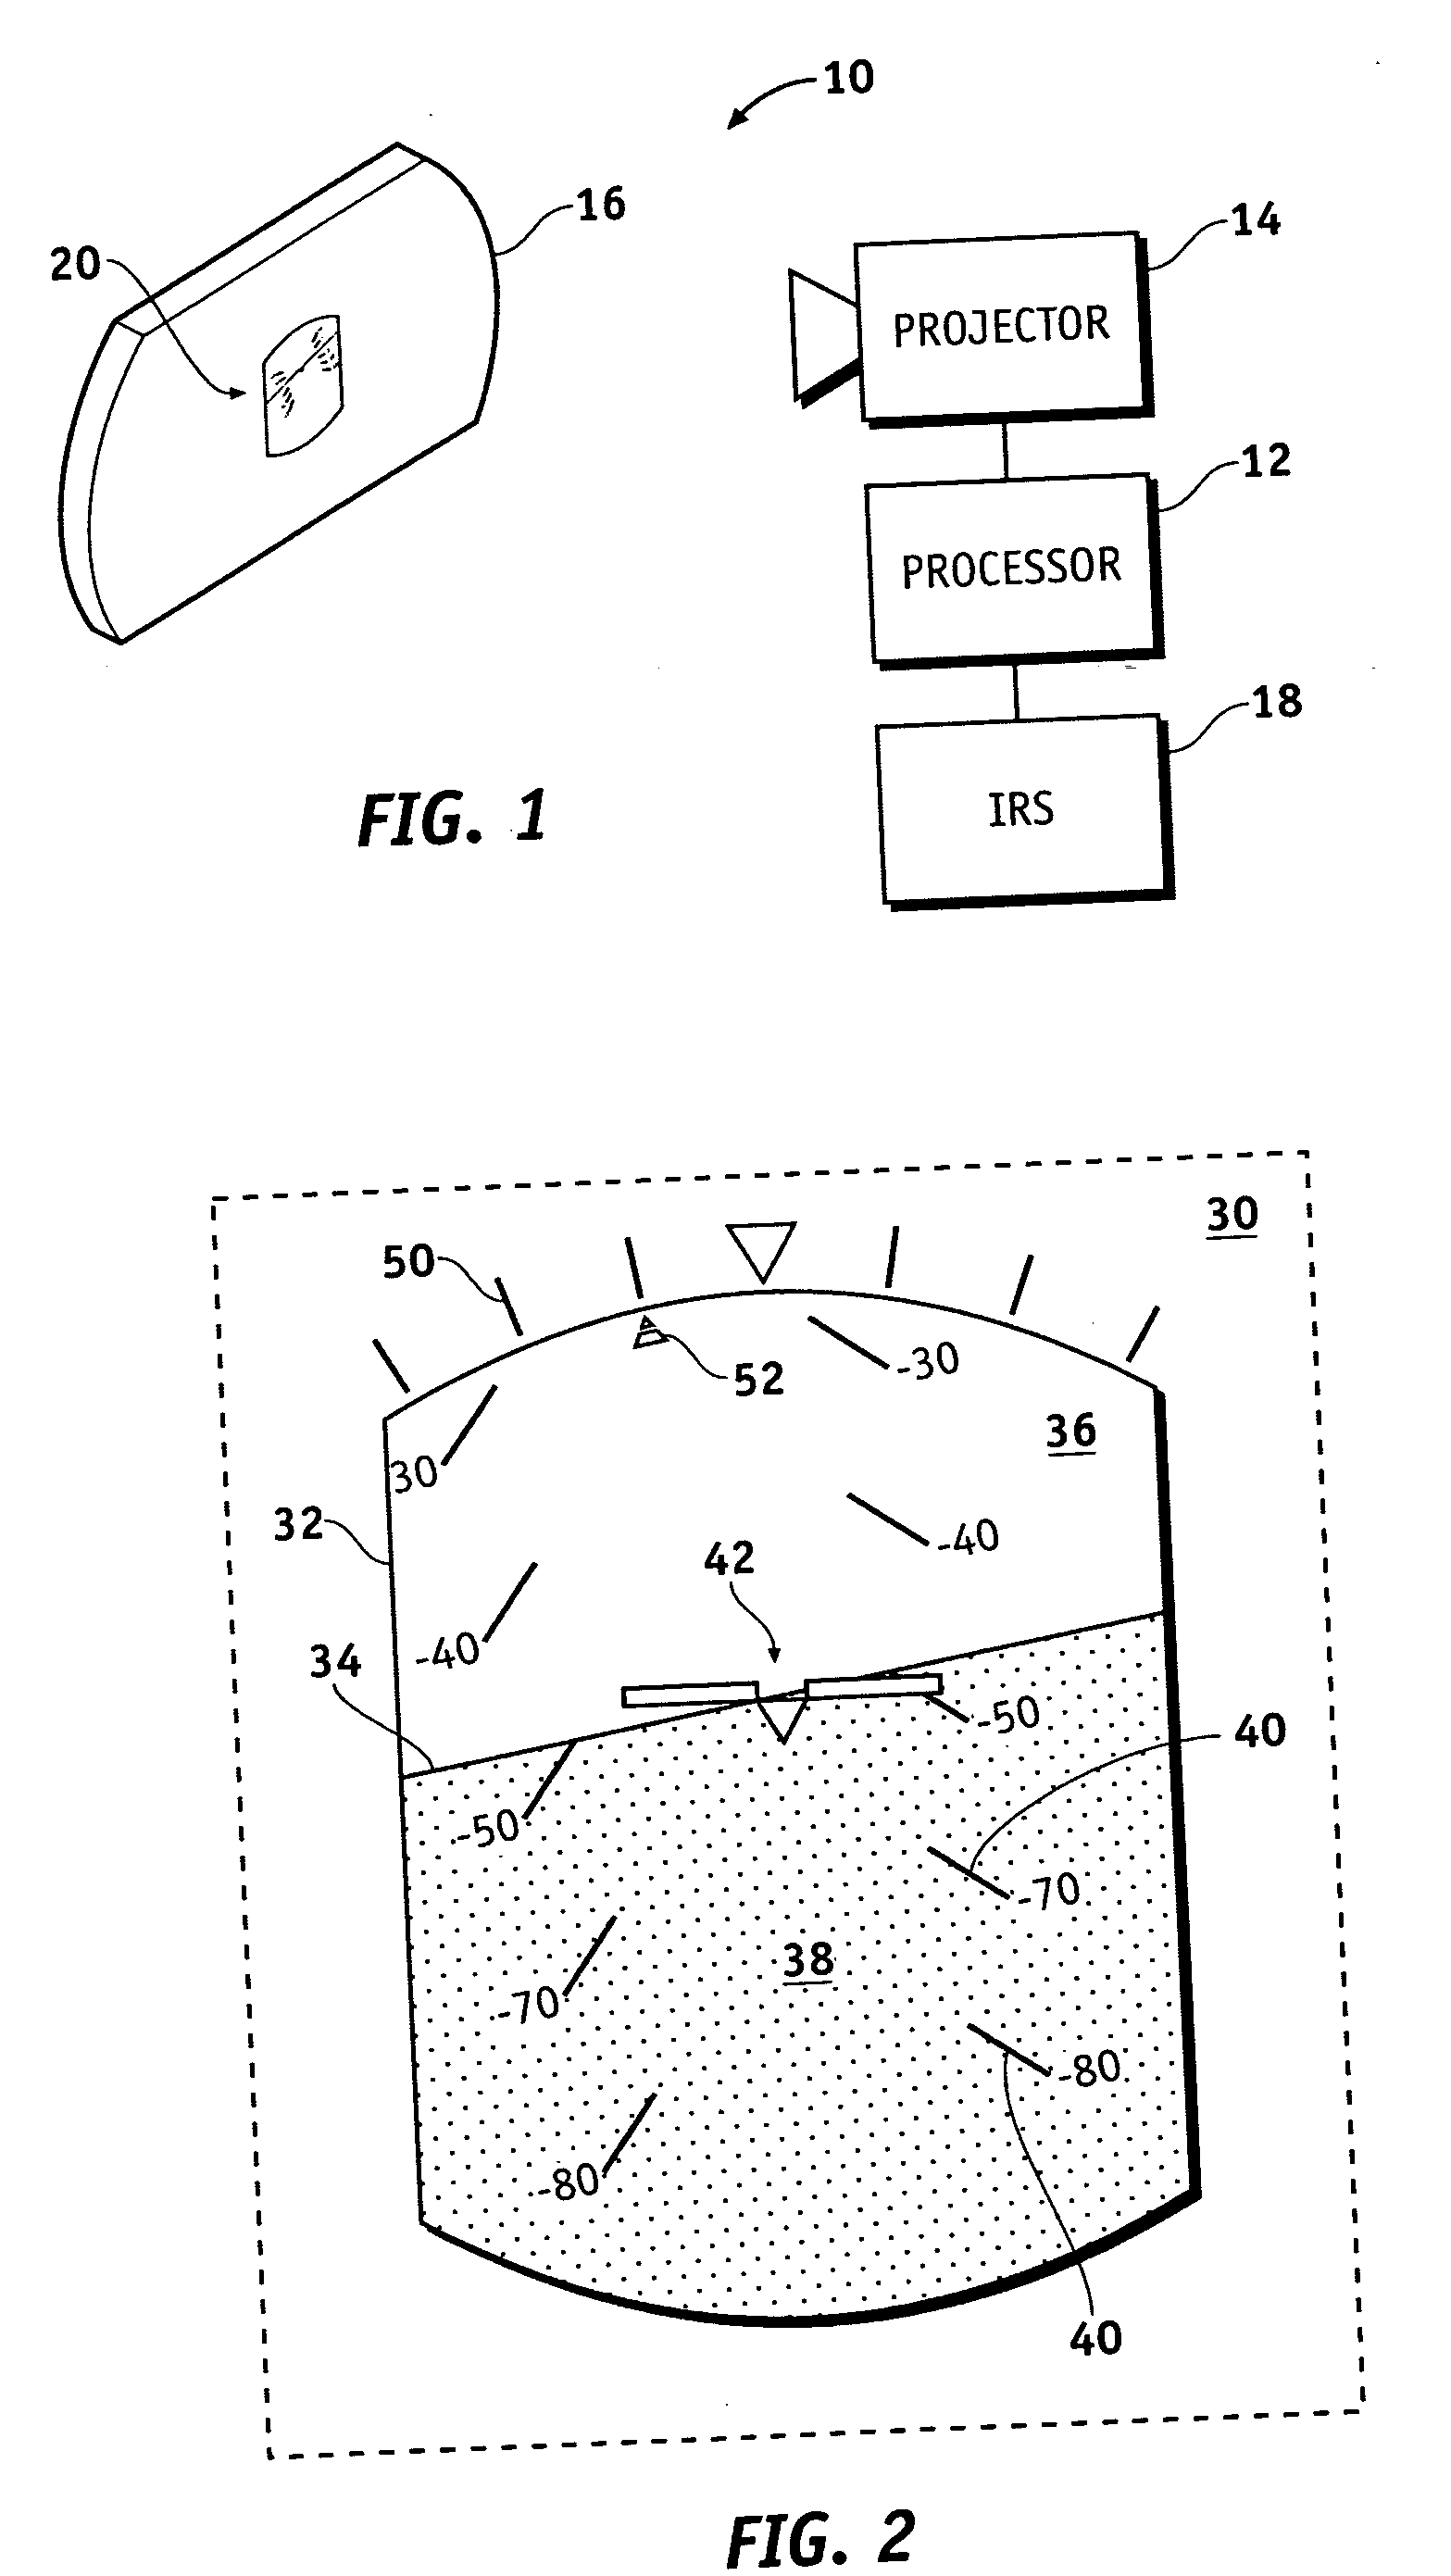 Method and HUD system for displaying unusual attitude